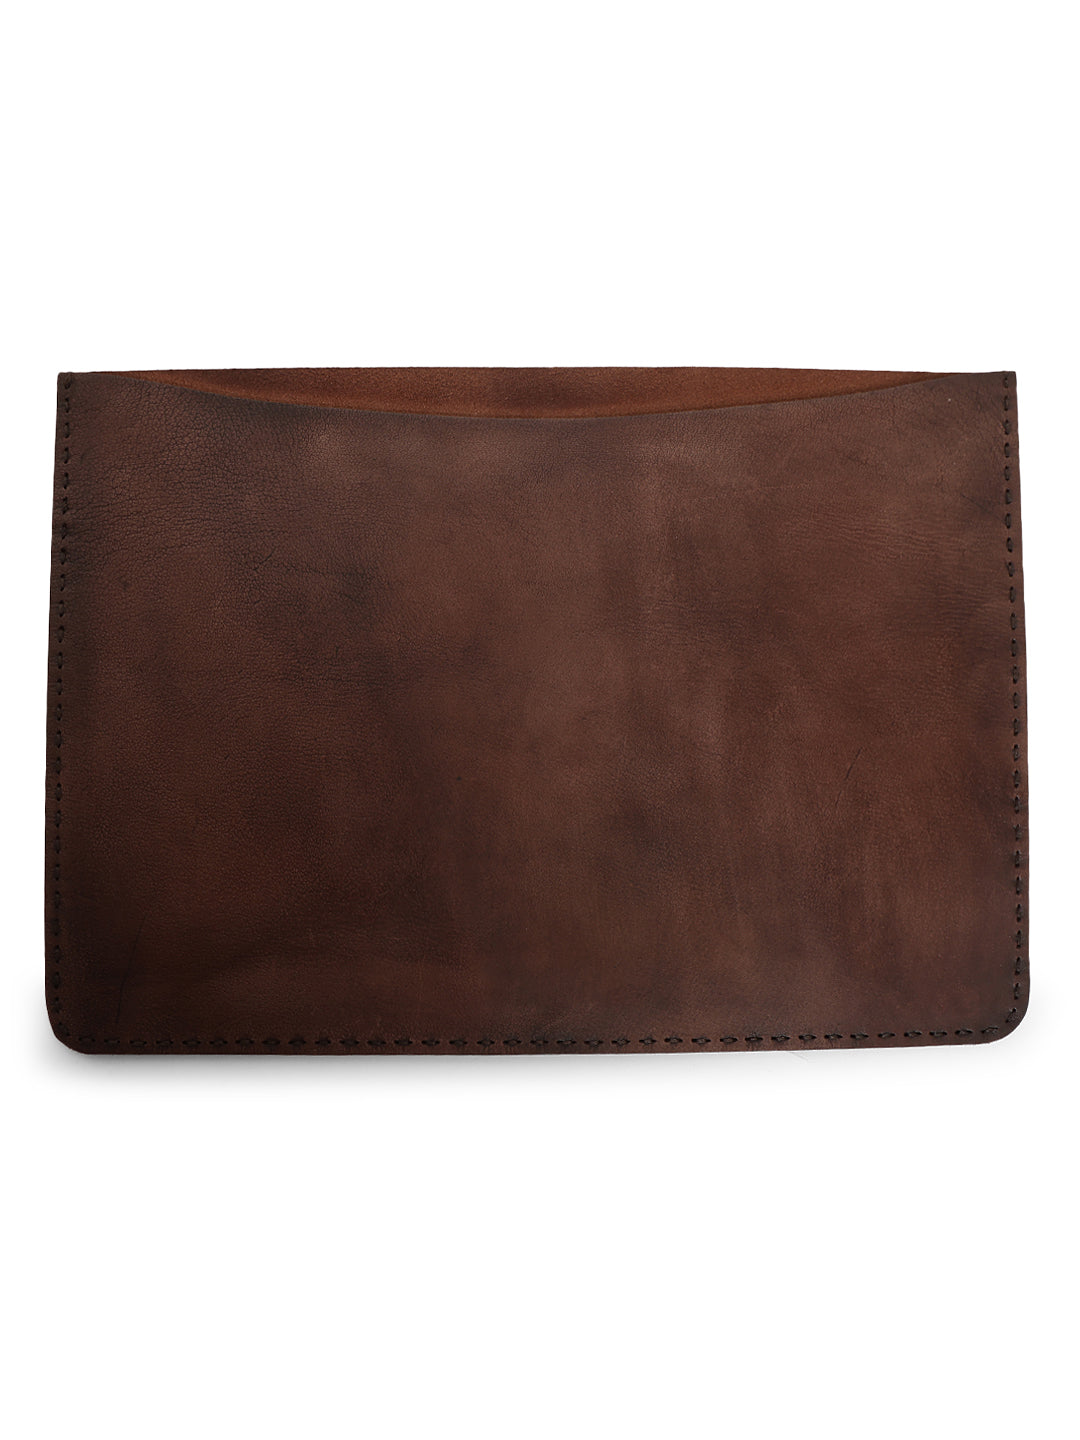 Classic Protection: Brown Leather Laptop Sleeves for Timeless Style